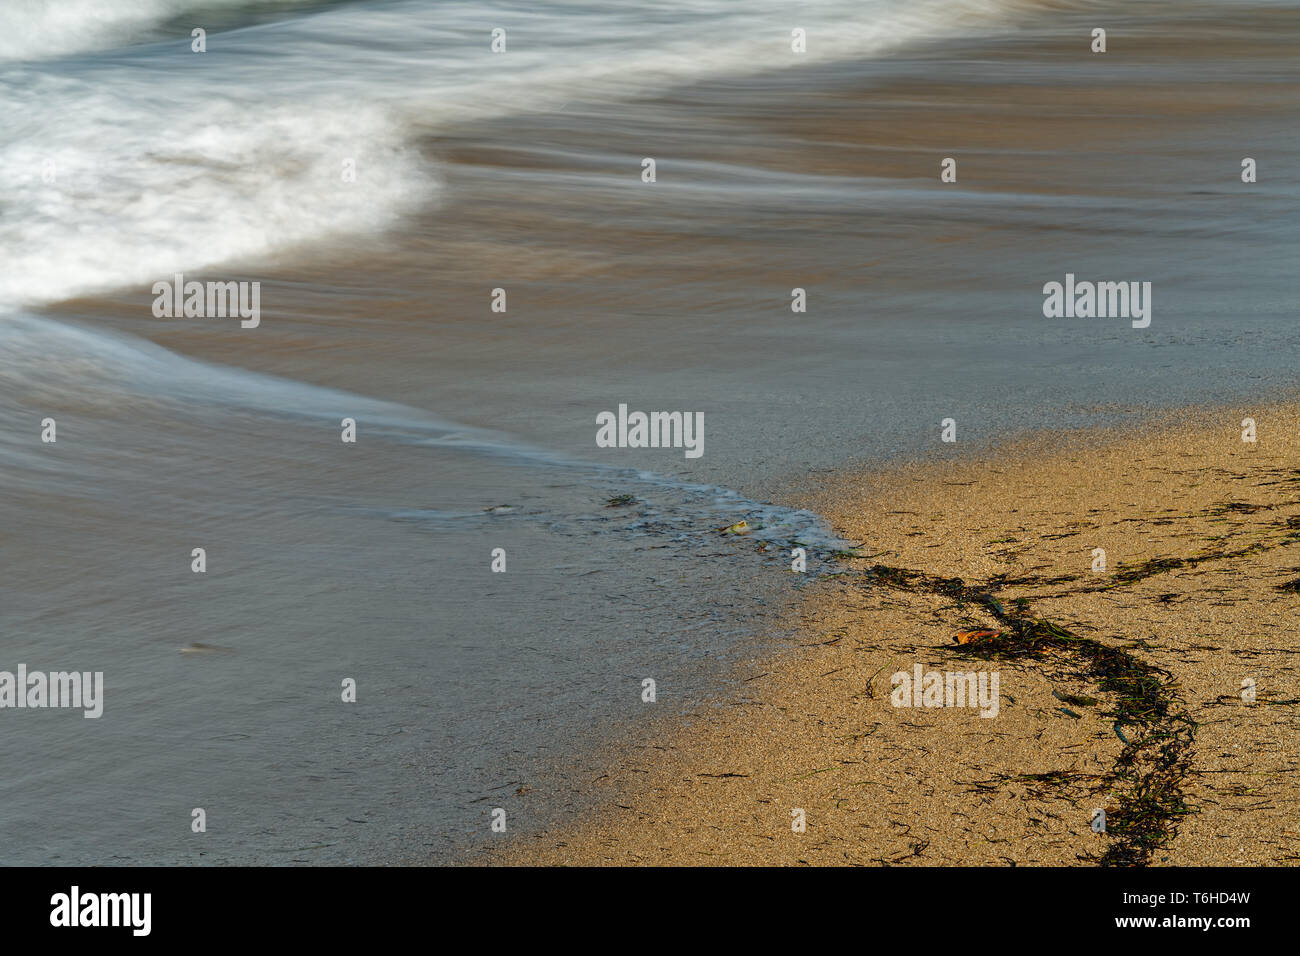 Detail view of a wave, which runs out on a sandy beach, the blue color of the sky is reflected in the shallow water, some washed-up seagrass on the sa Stock Photo